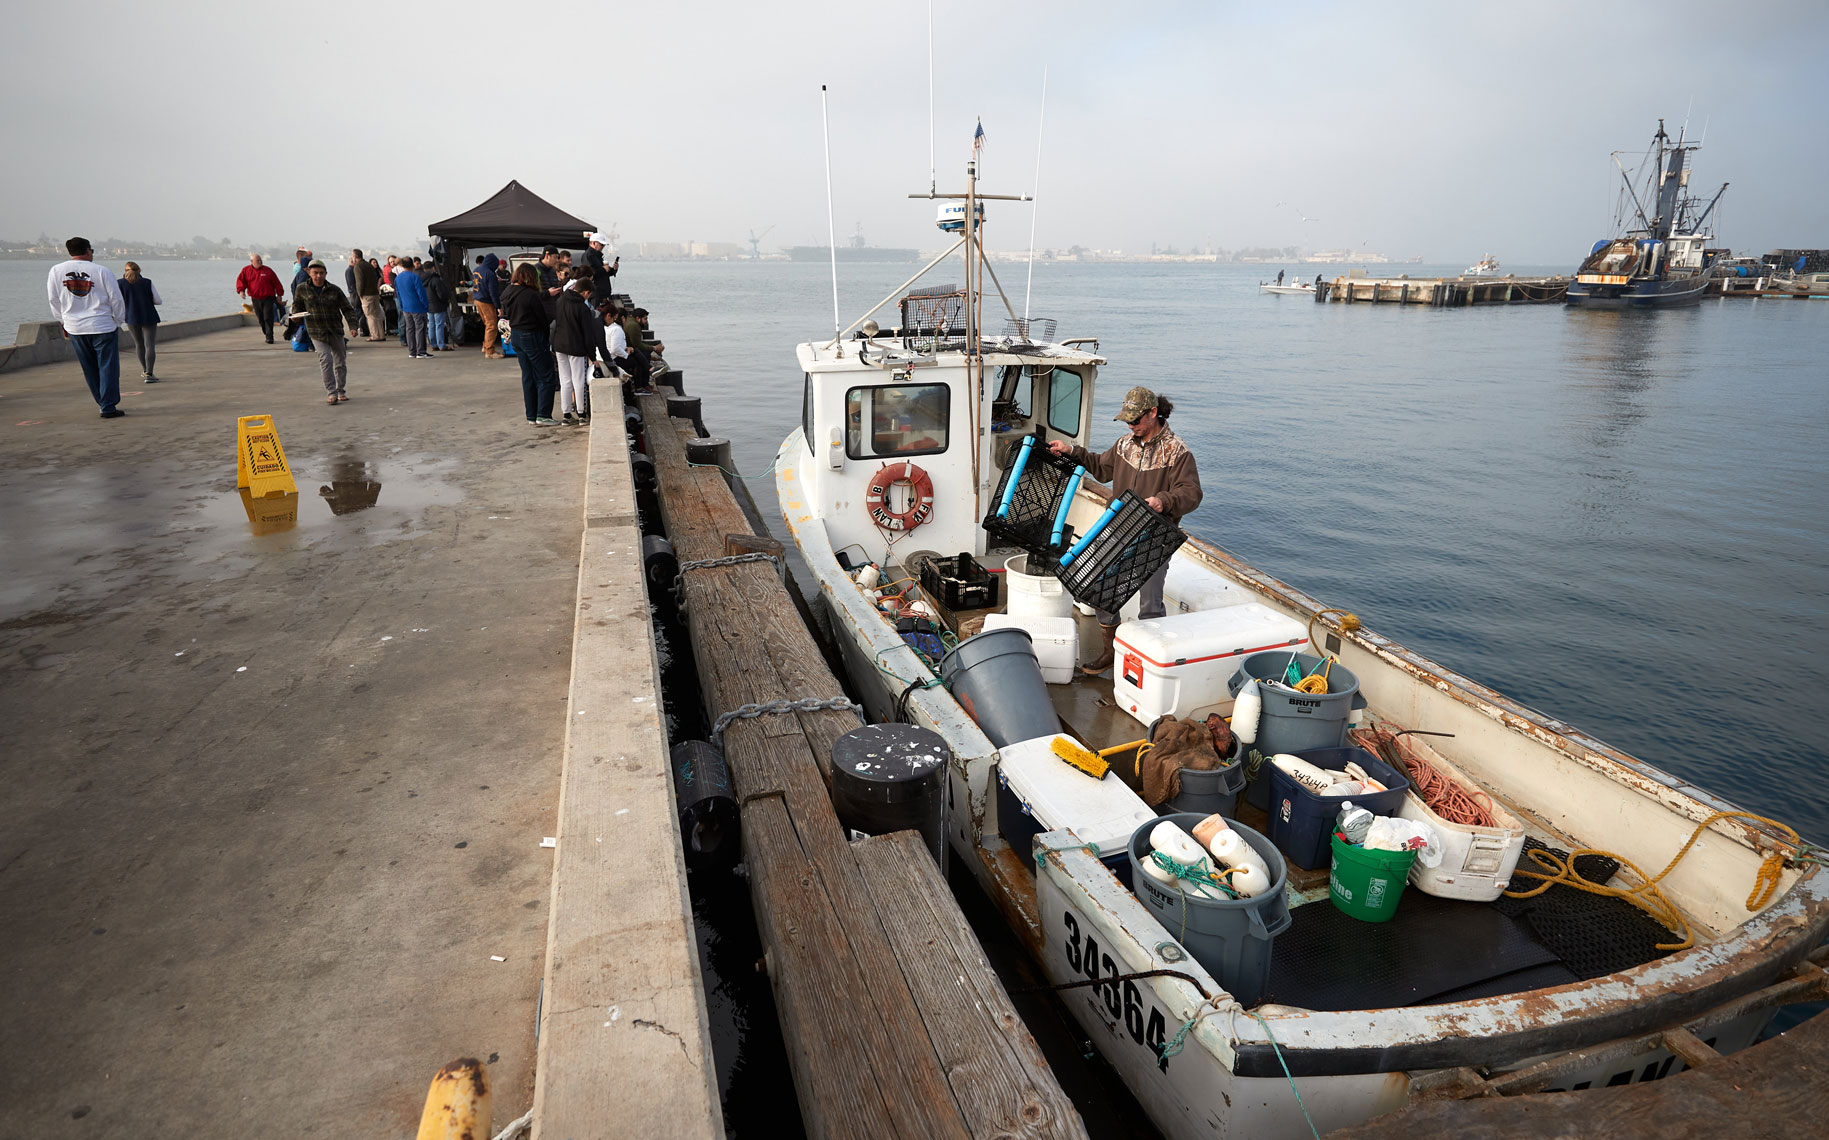 A Fisherman Organizes his Boat After Offloading Catch